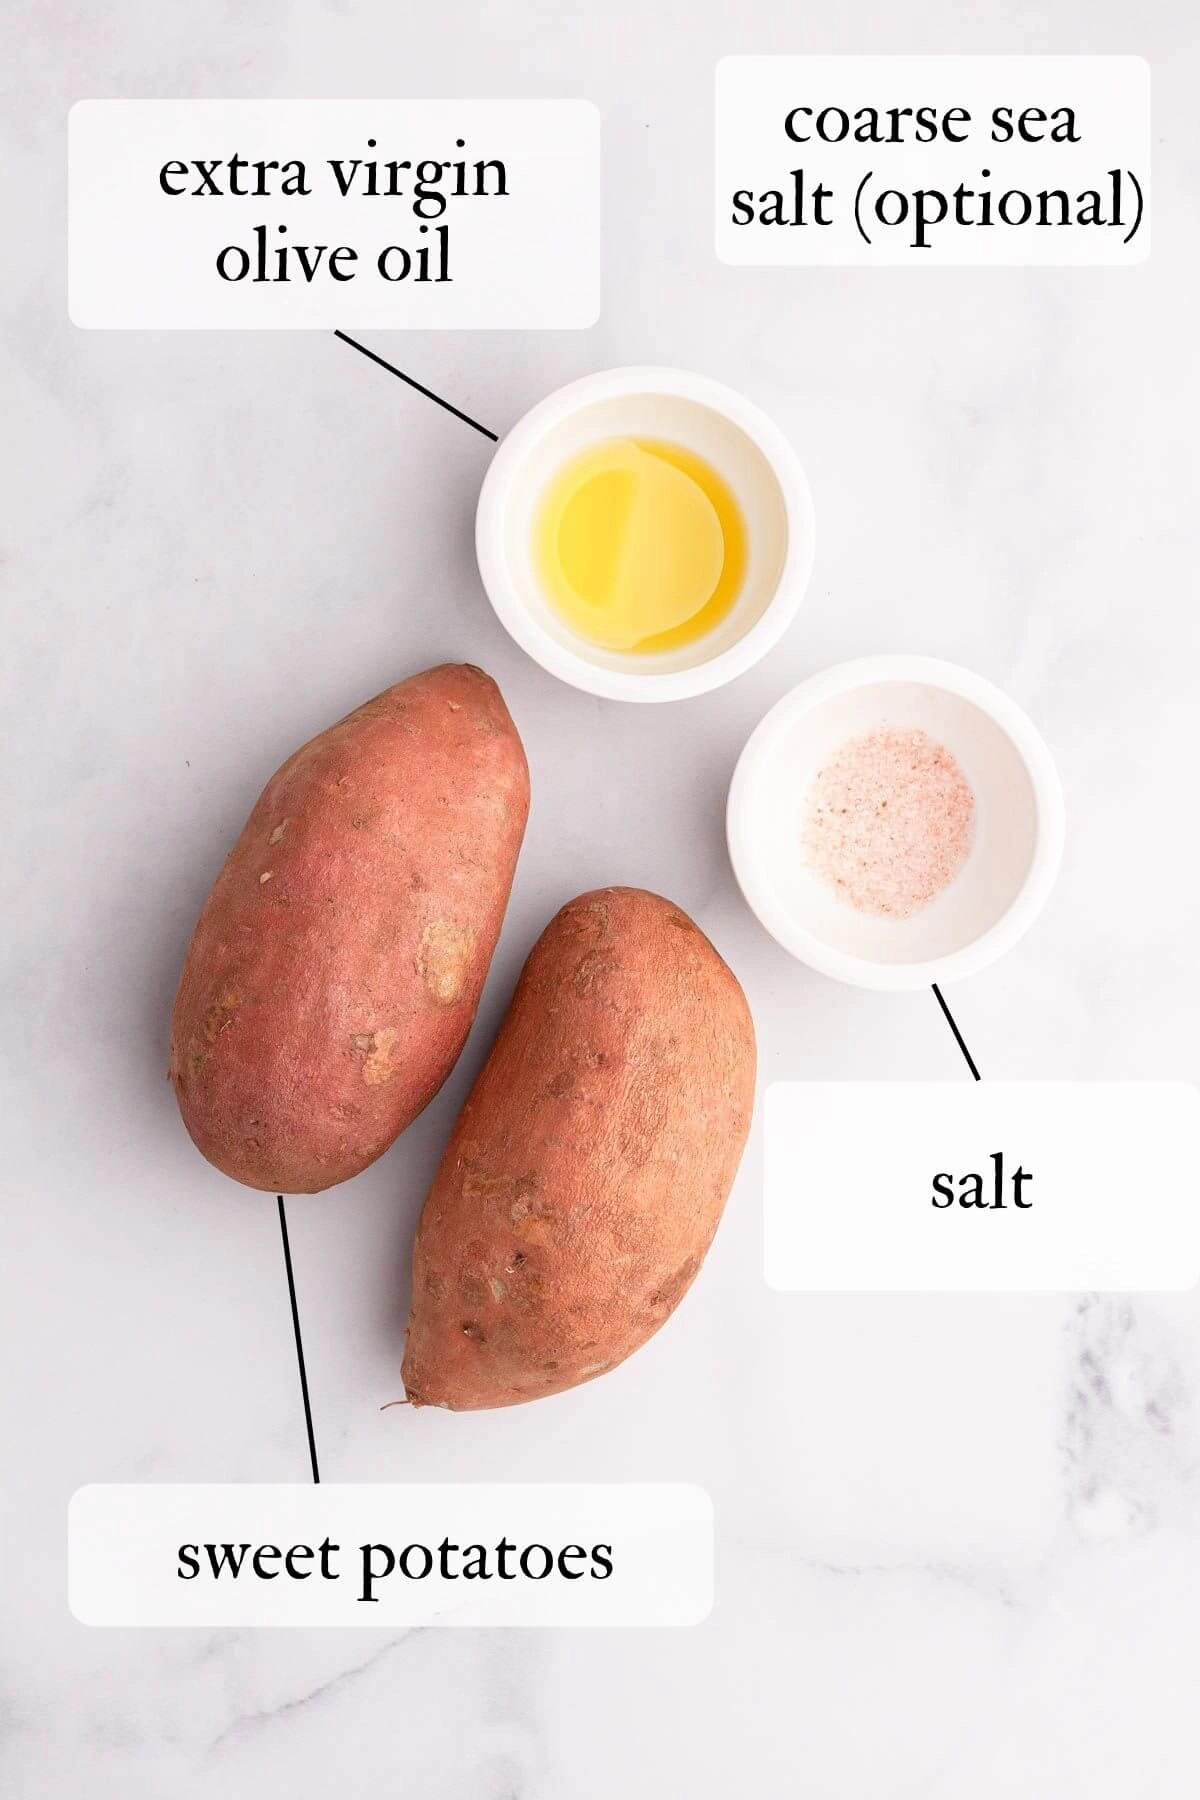 images of sweet potatoes, olive oil, and salt on counter with their names labeled